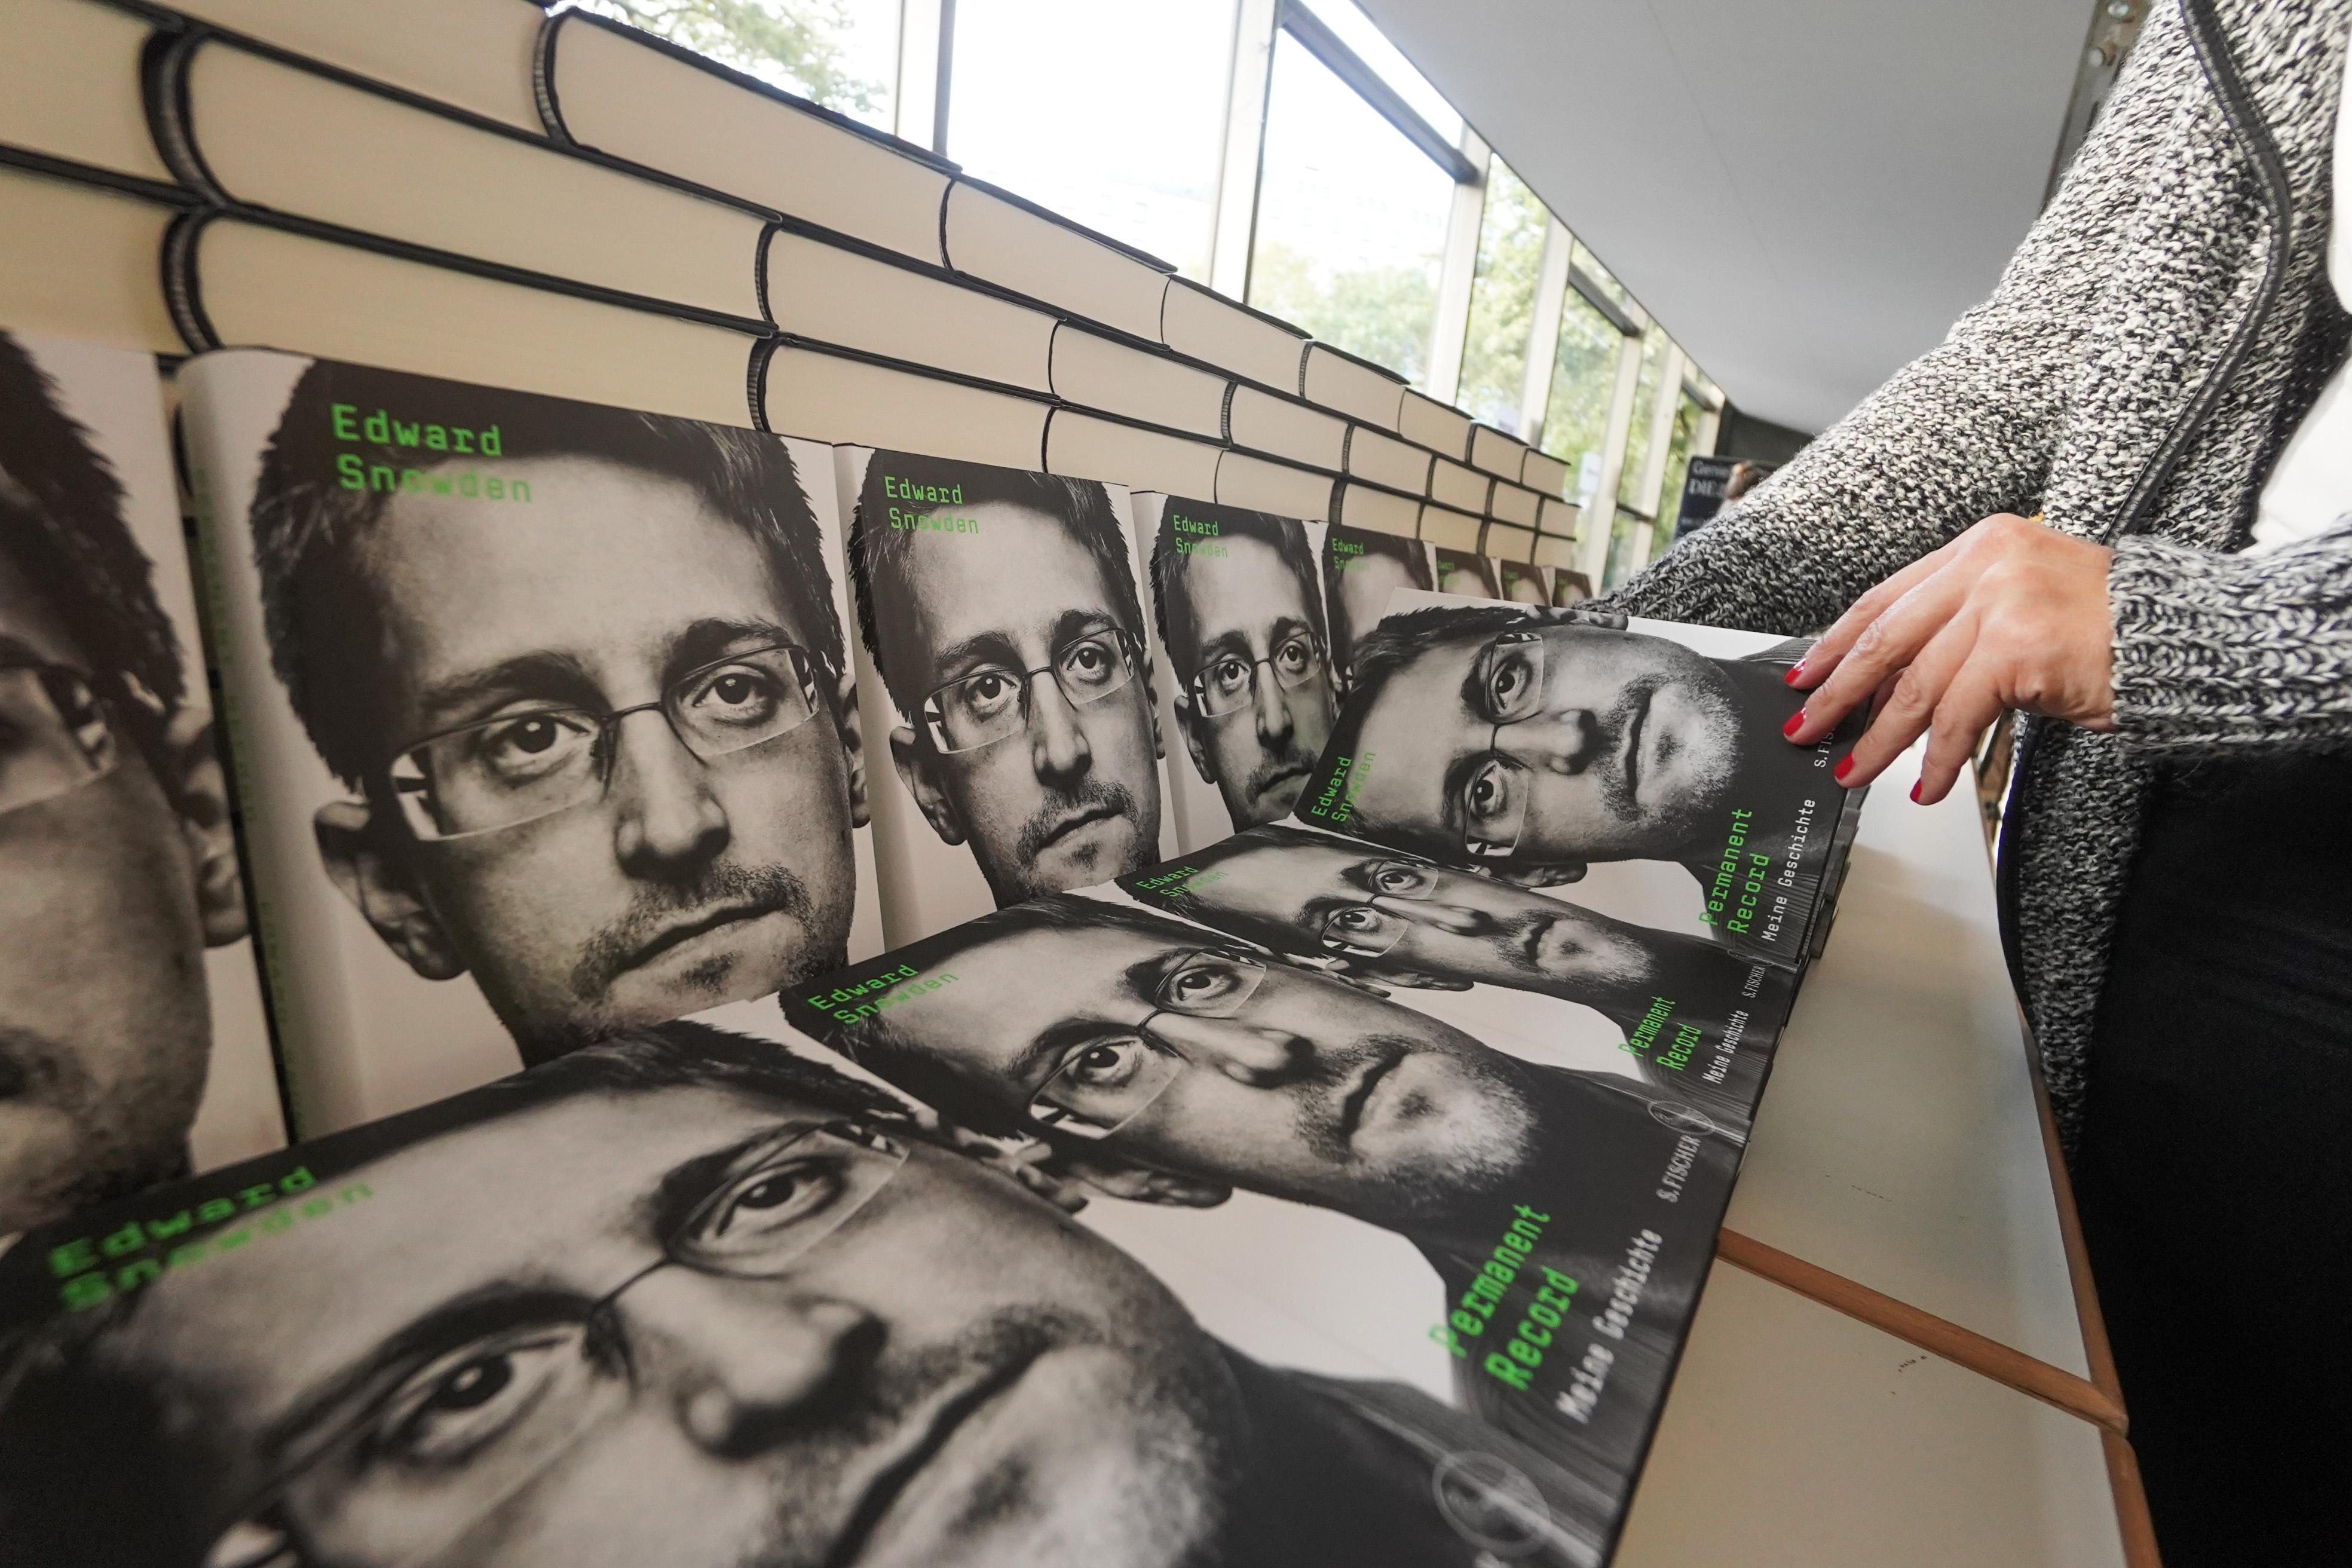 Copies of Edward Snowden's new book during an appearance via video conference.